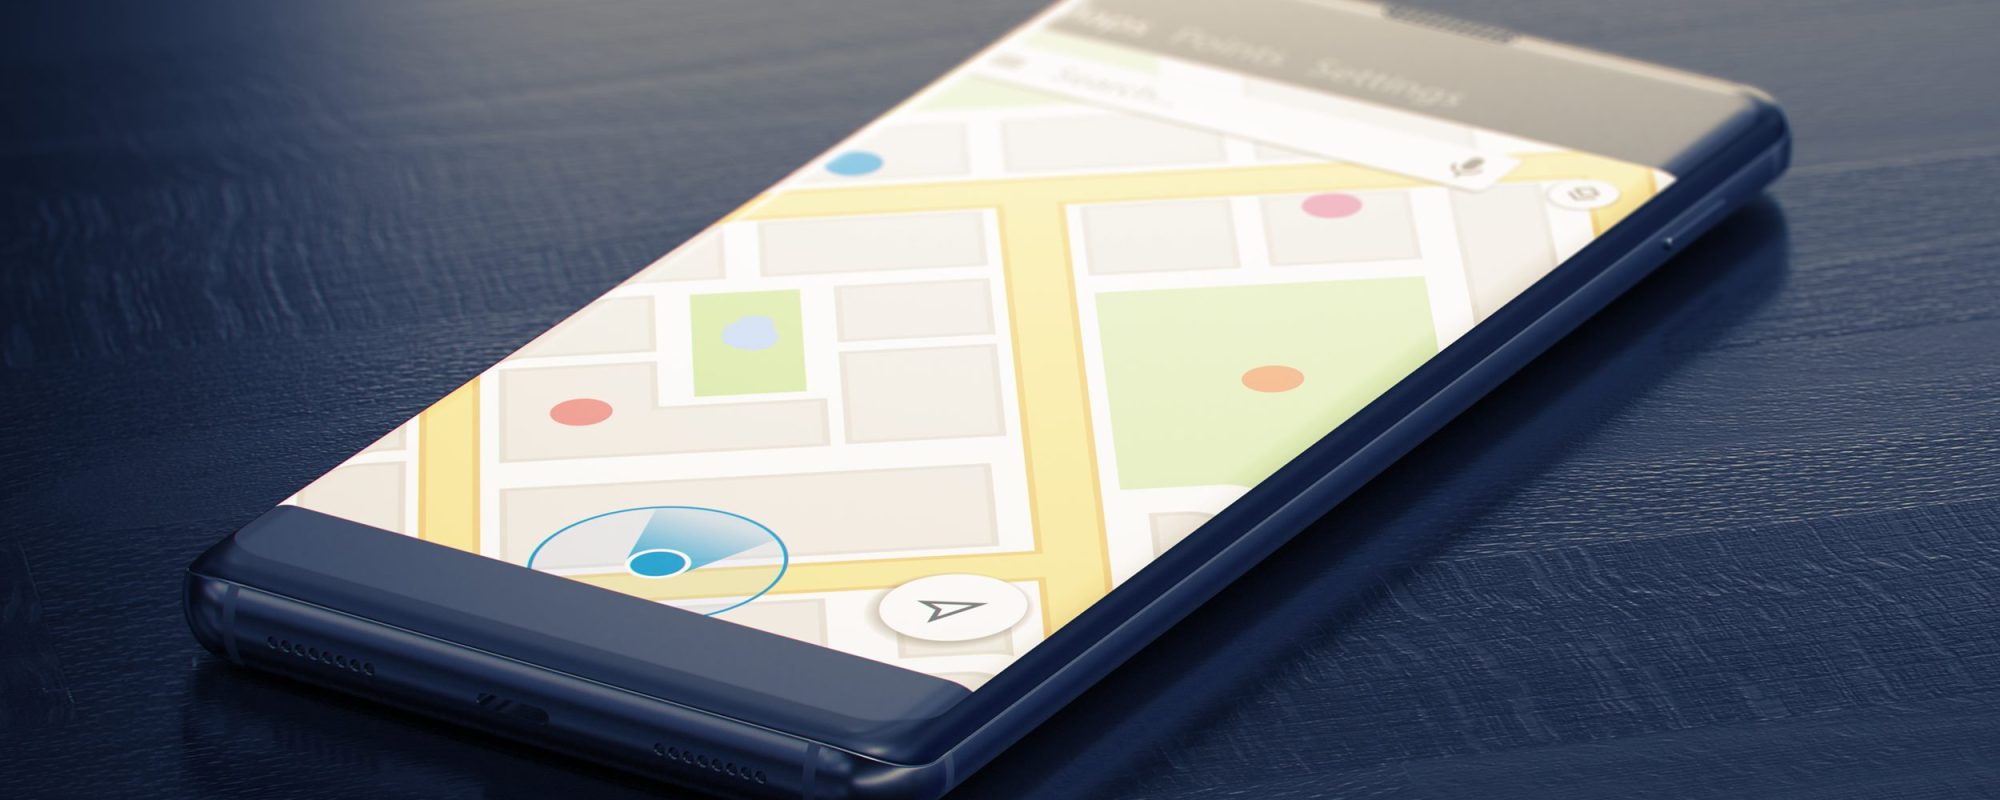 GEO TARGETING on a Mobile Phone. Online Map on a Screen. Close-up Image of Modern Smartphone with Mao or Geo Tracking on Dark Surface. Map Tracking or Geolocation Concept. 3D Render.